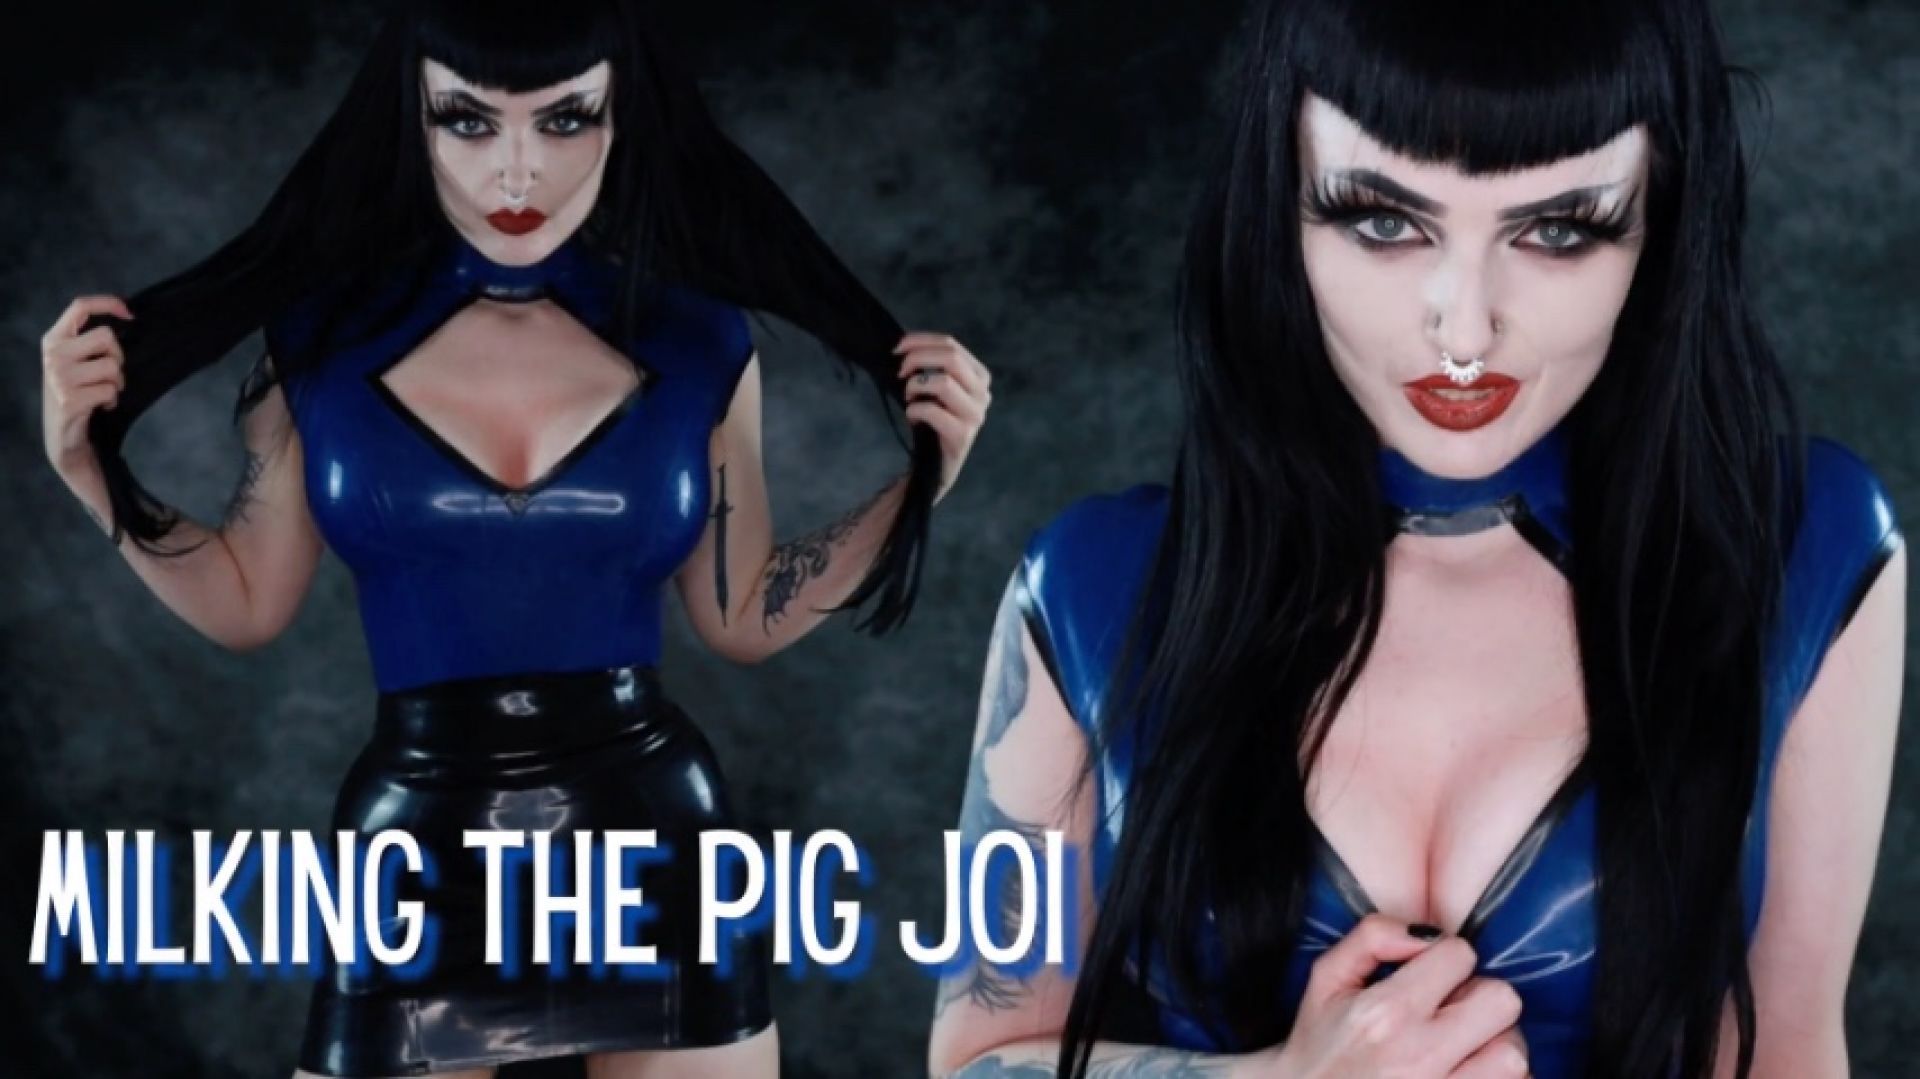 Milking The Pig JOI